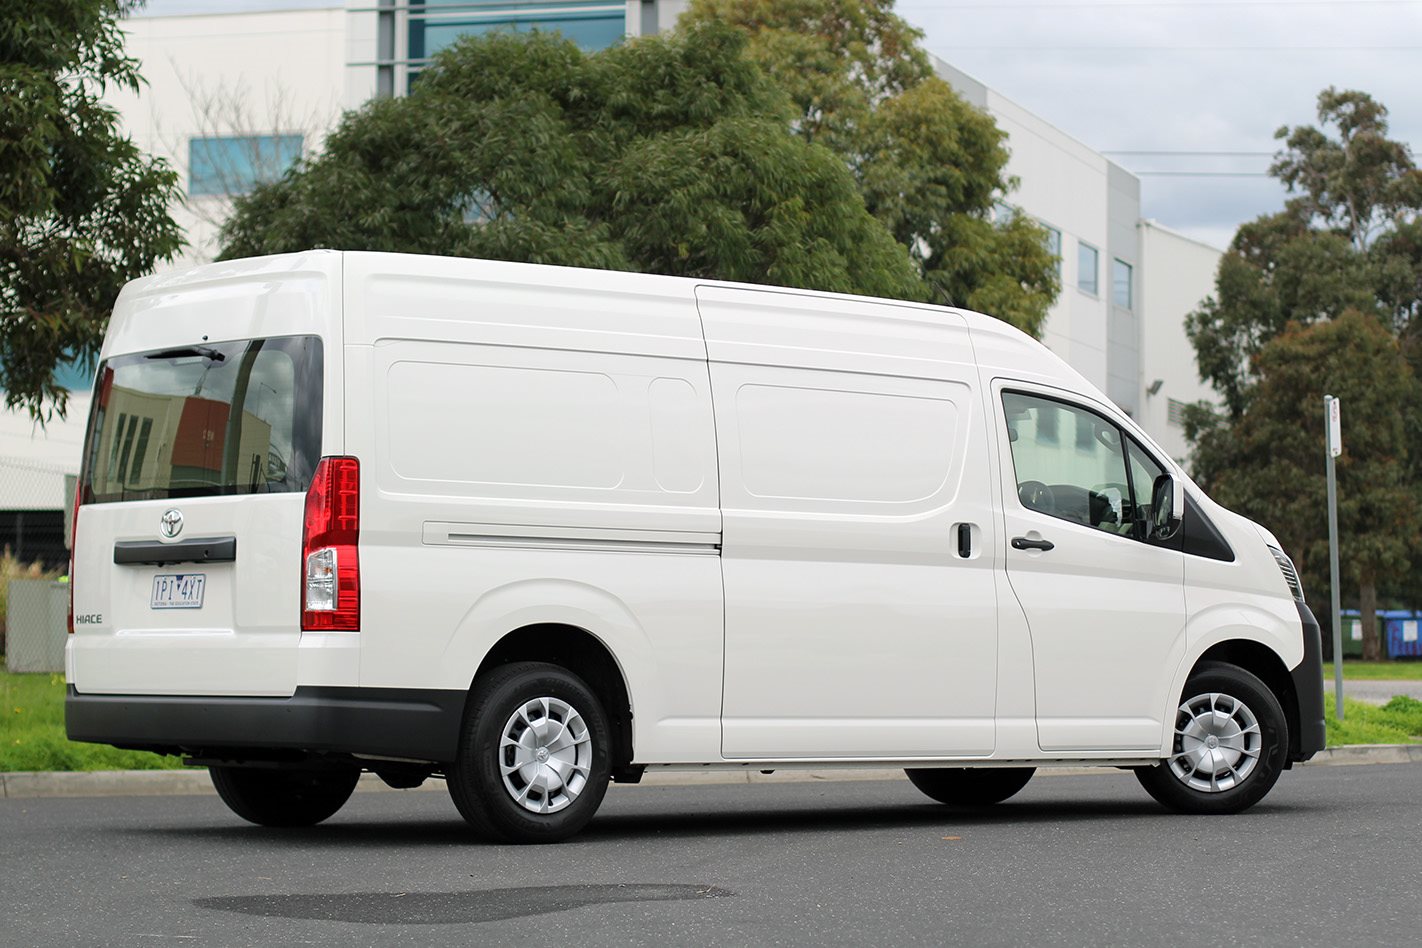 Toyota Hiace SLWB diesel automatic review